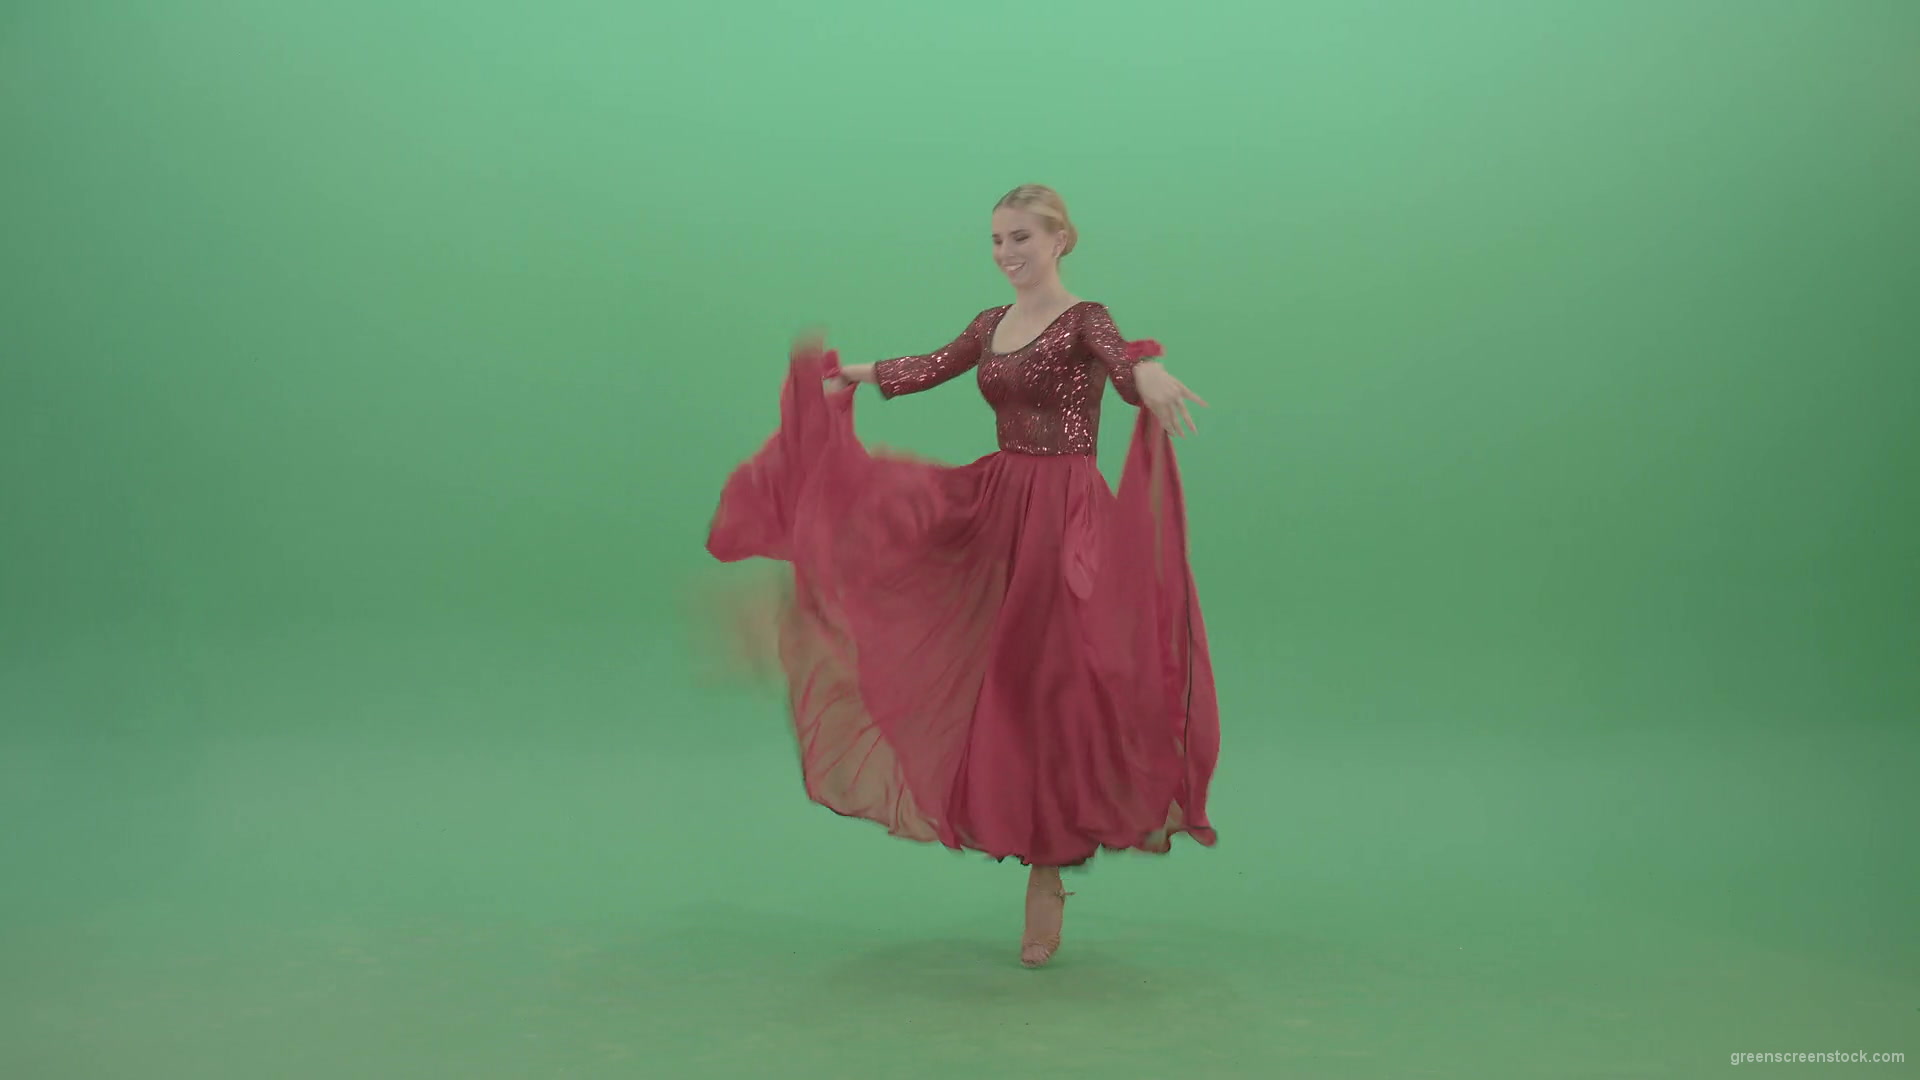 Moulin-rouge-dancing-girl-in-red-dress-jumping-on-green-screen-4K-Video-Footage-1920_009 Green Screen Stock